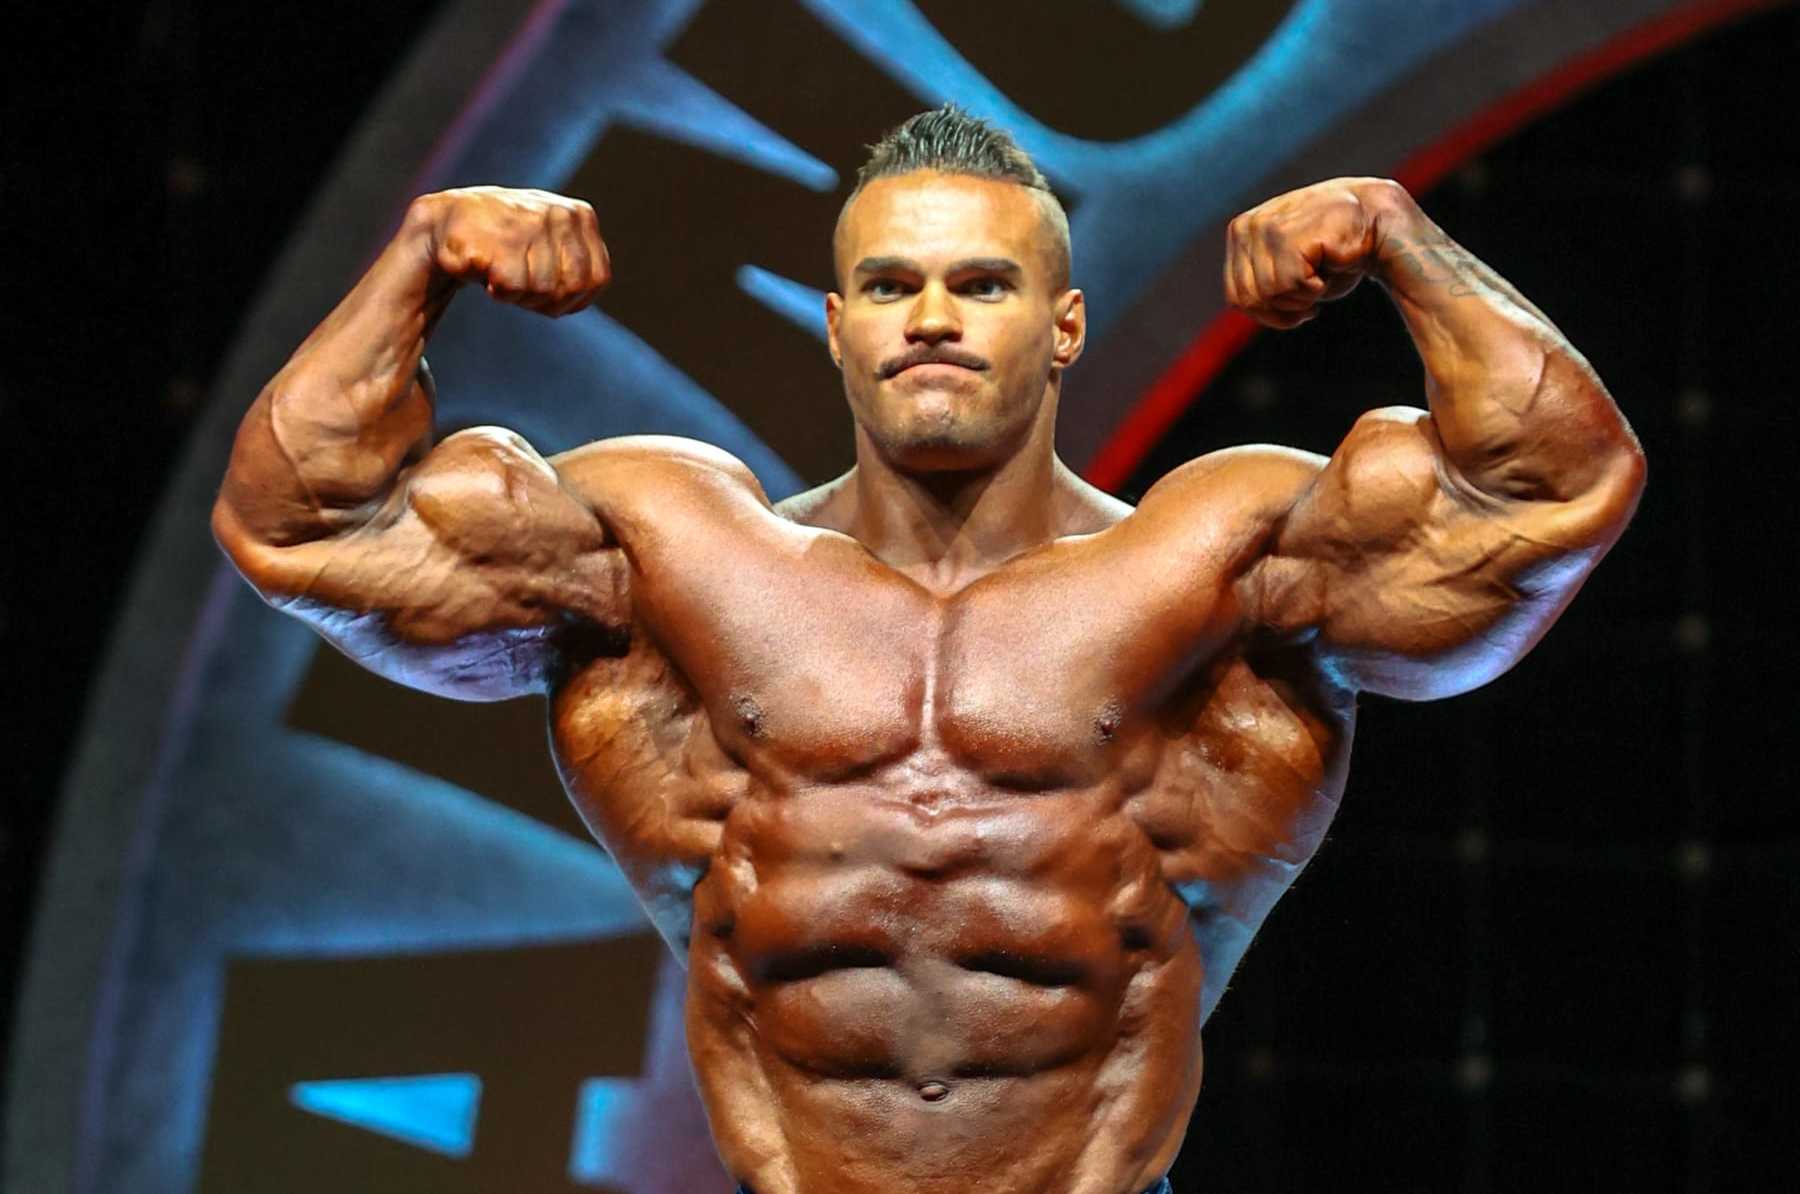 Mr Olympia 2023 results and prize money - where every bodybuilder finished